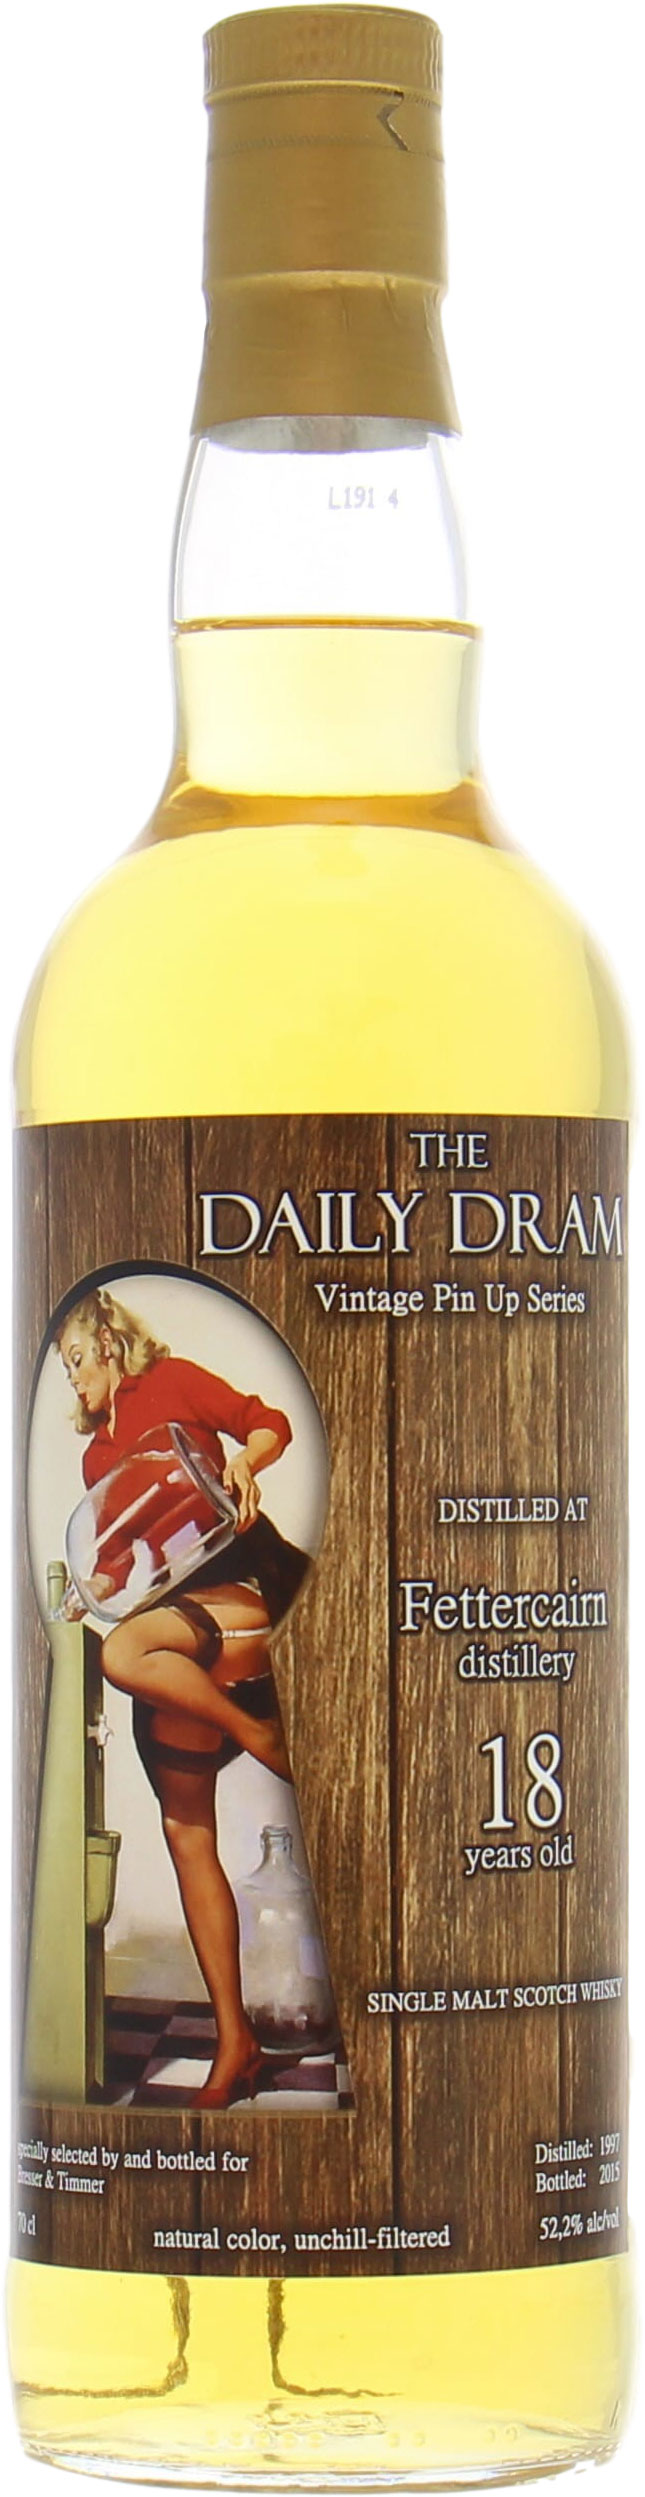 Fettercairn - 18 Years Old  Daily Dram Vintage Pin Up Series 52.2% 1997